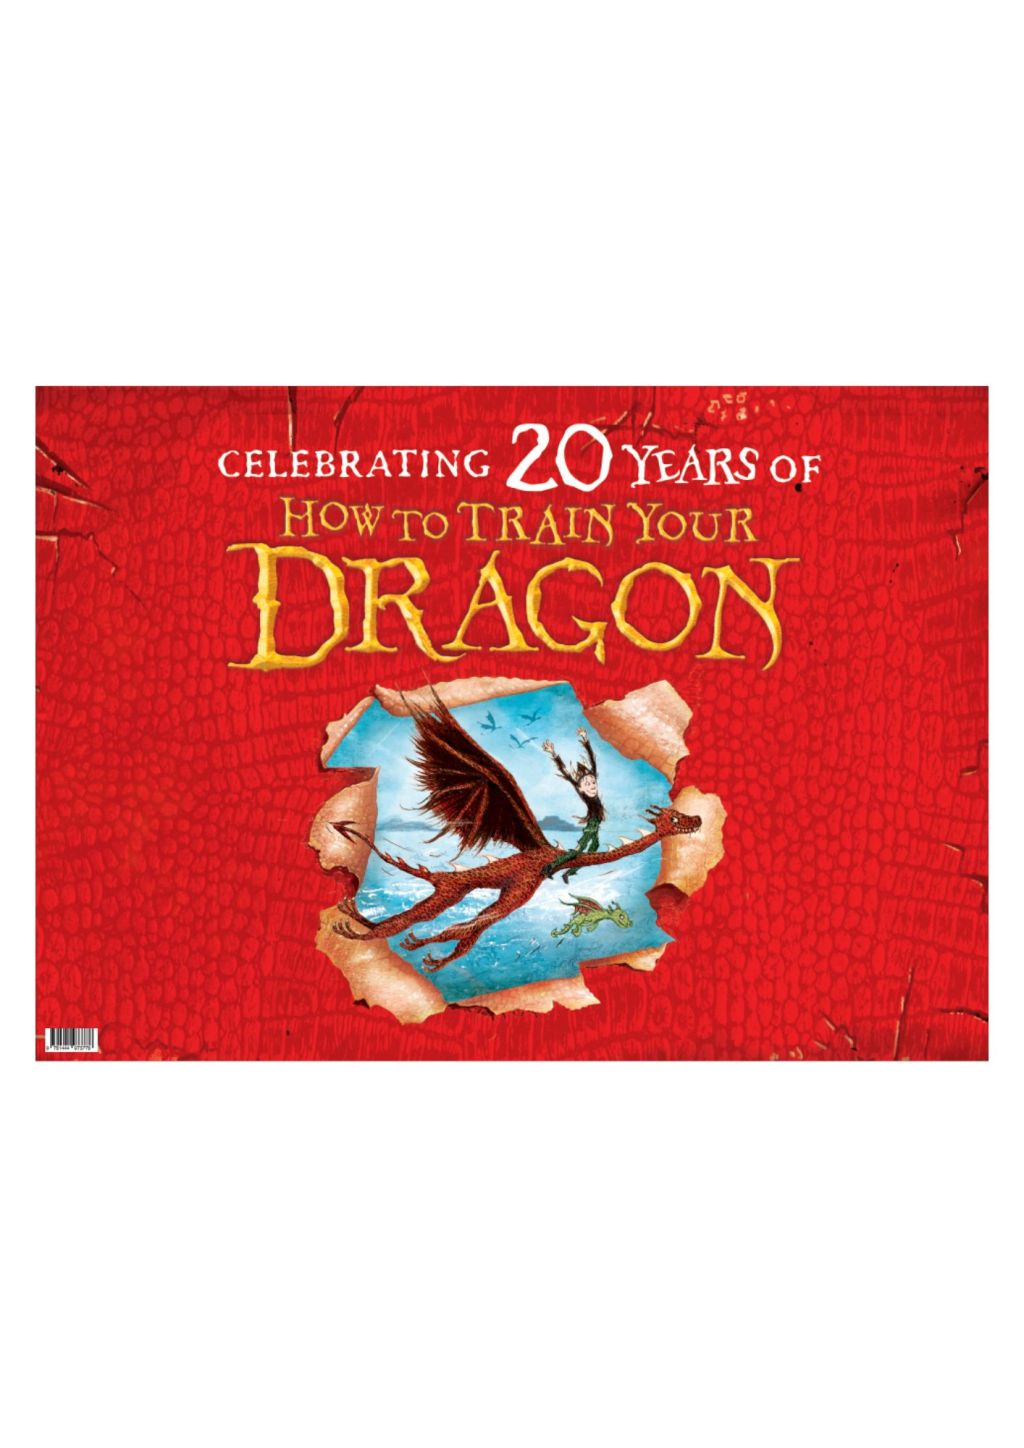 How to Train Your Dragon 20th anniversary table header